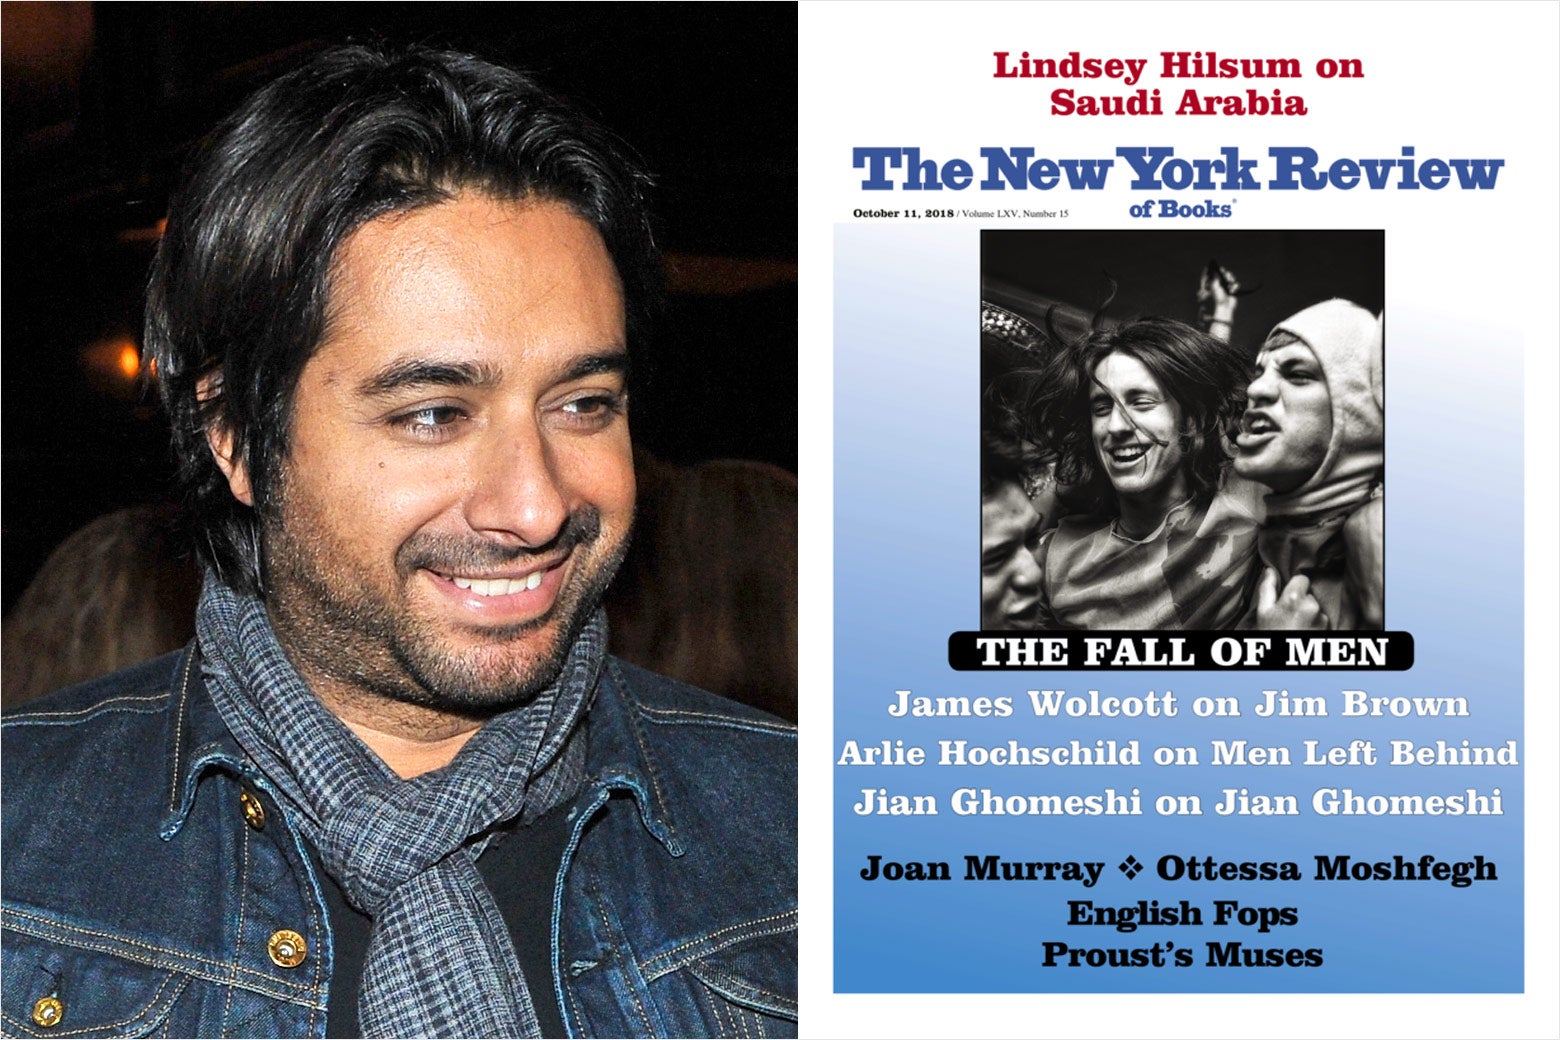 Jian Ghomeshi and the New York Review of Books cover with the “Fall of Men” cover package.